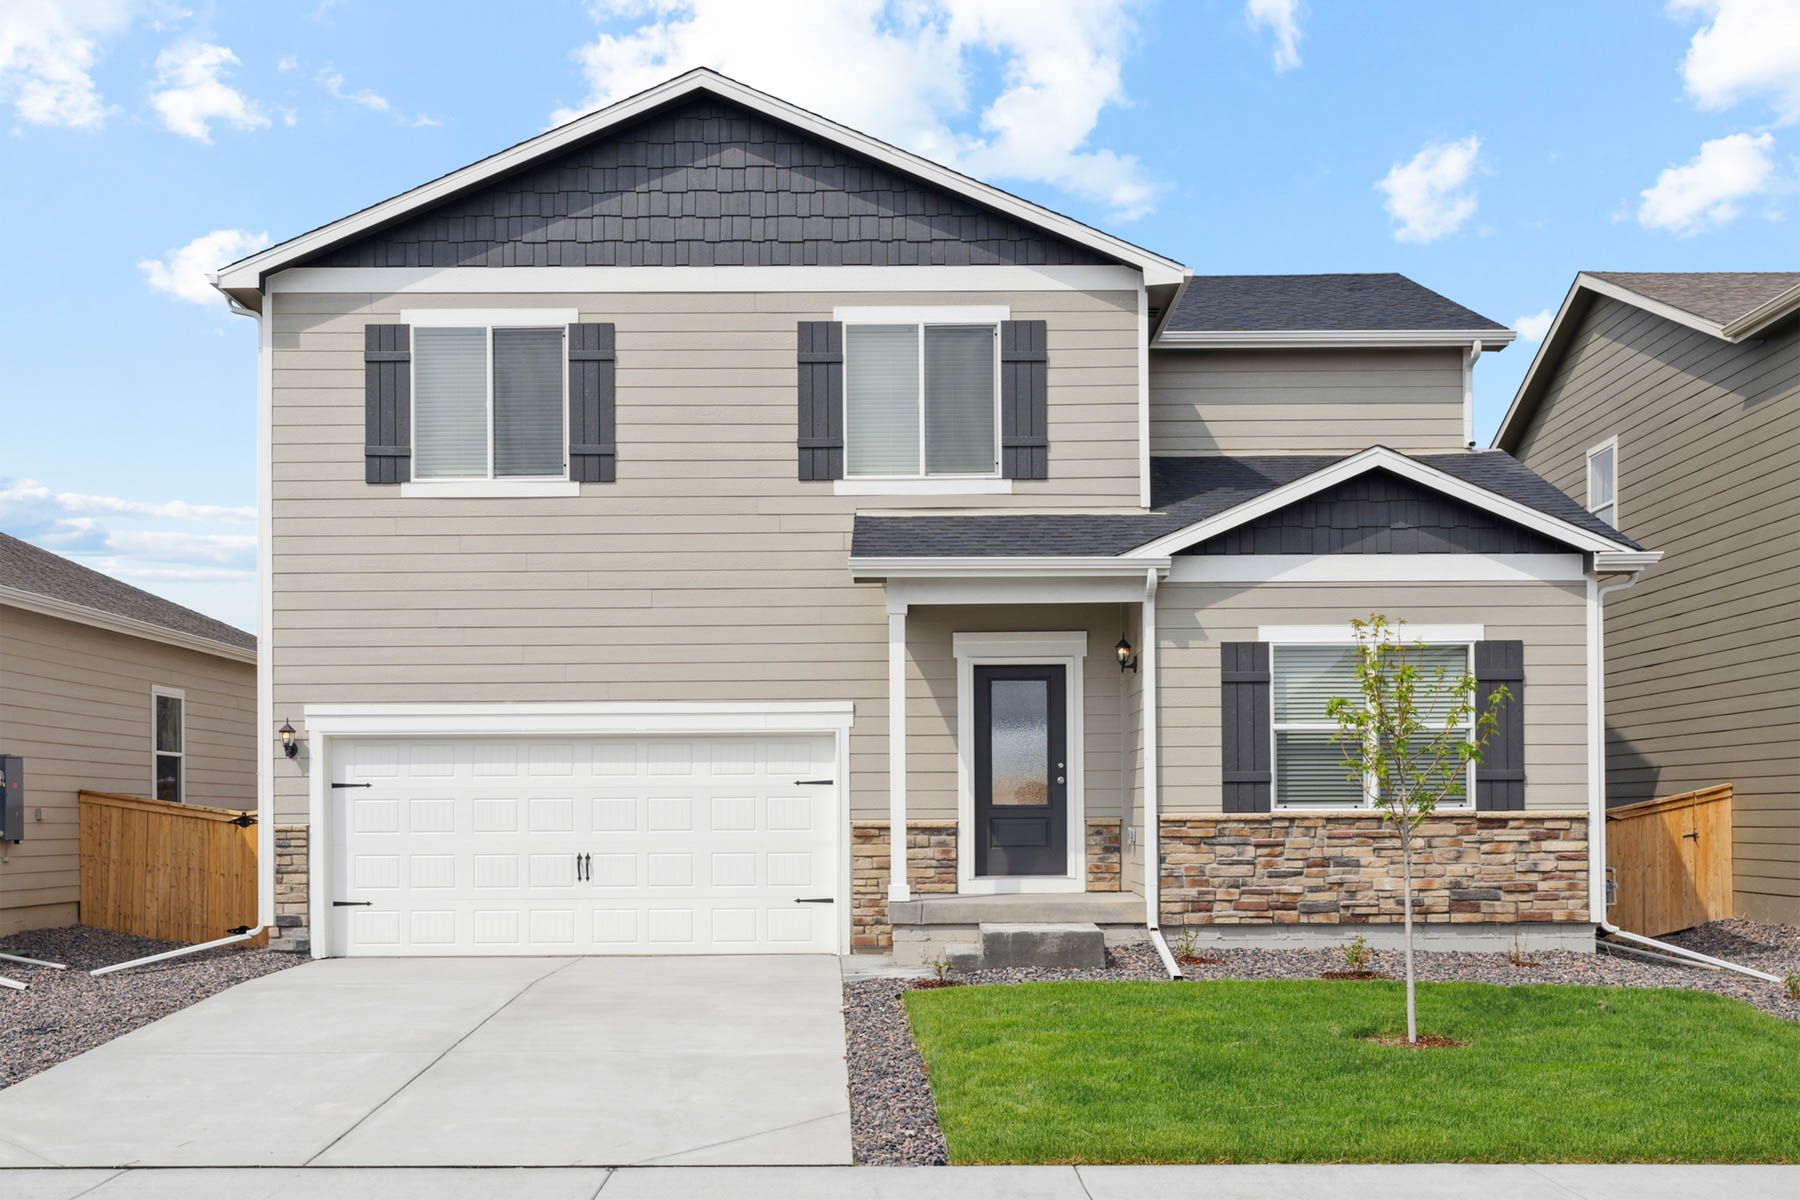 Roosevelt by LGI Homes:The Roosevelt is a beautiful two-story home.